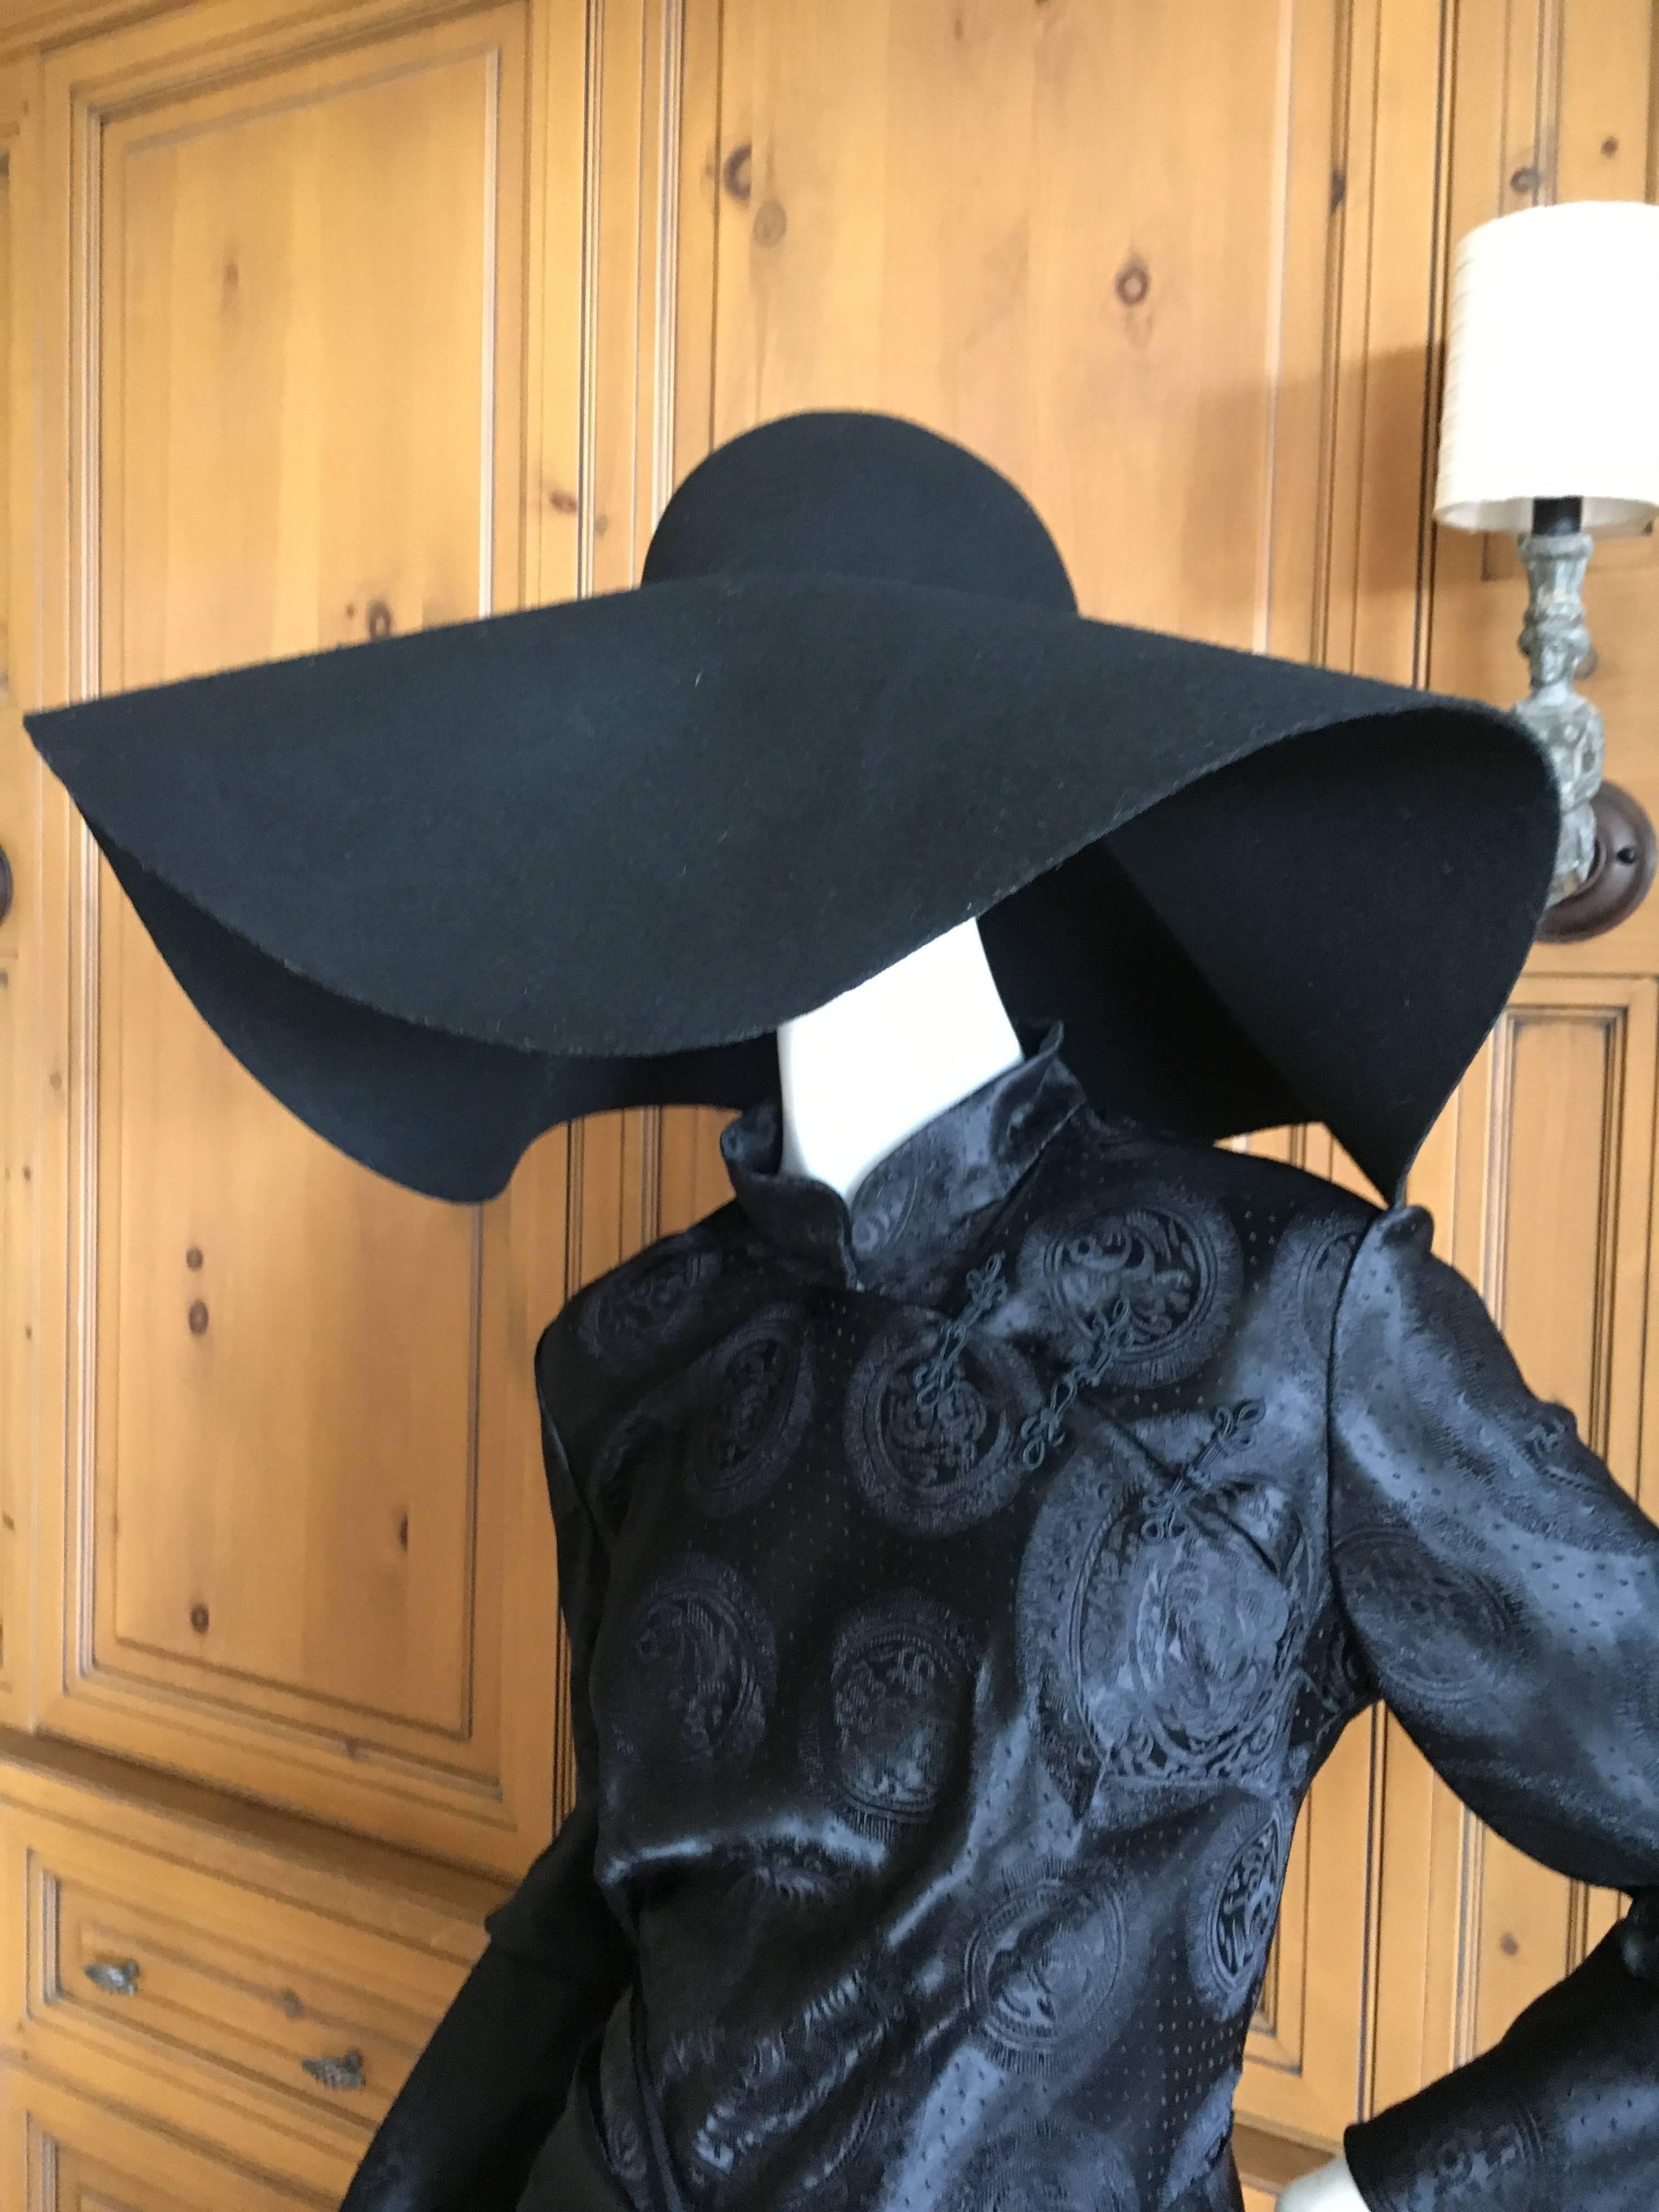 Brilliant large brim hat from Yves Saint Laurent Rive Gauche, new with tags.
Size 56